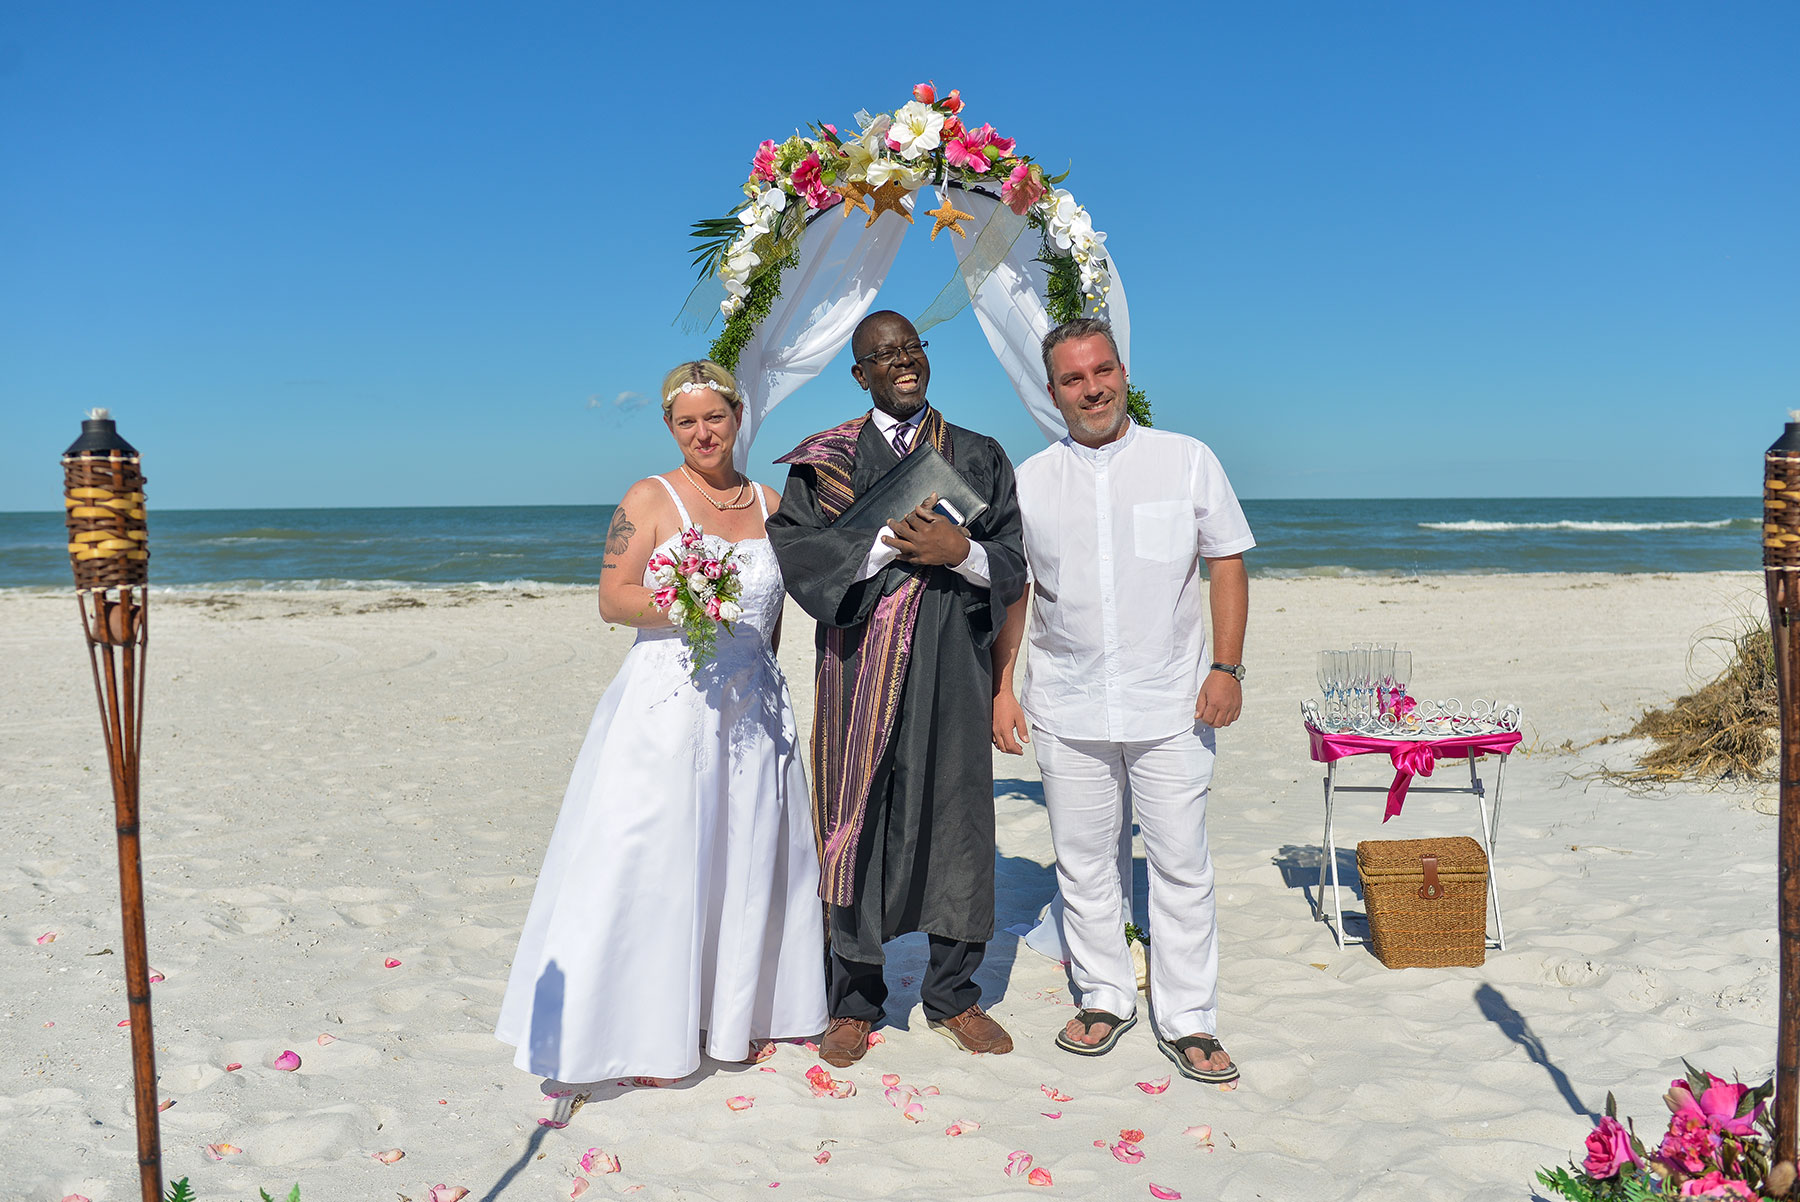 Clearwater beach officiant service for Sandra and Holger's vow renewal